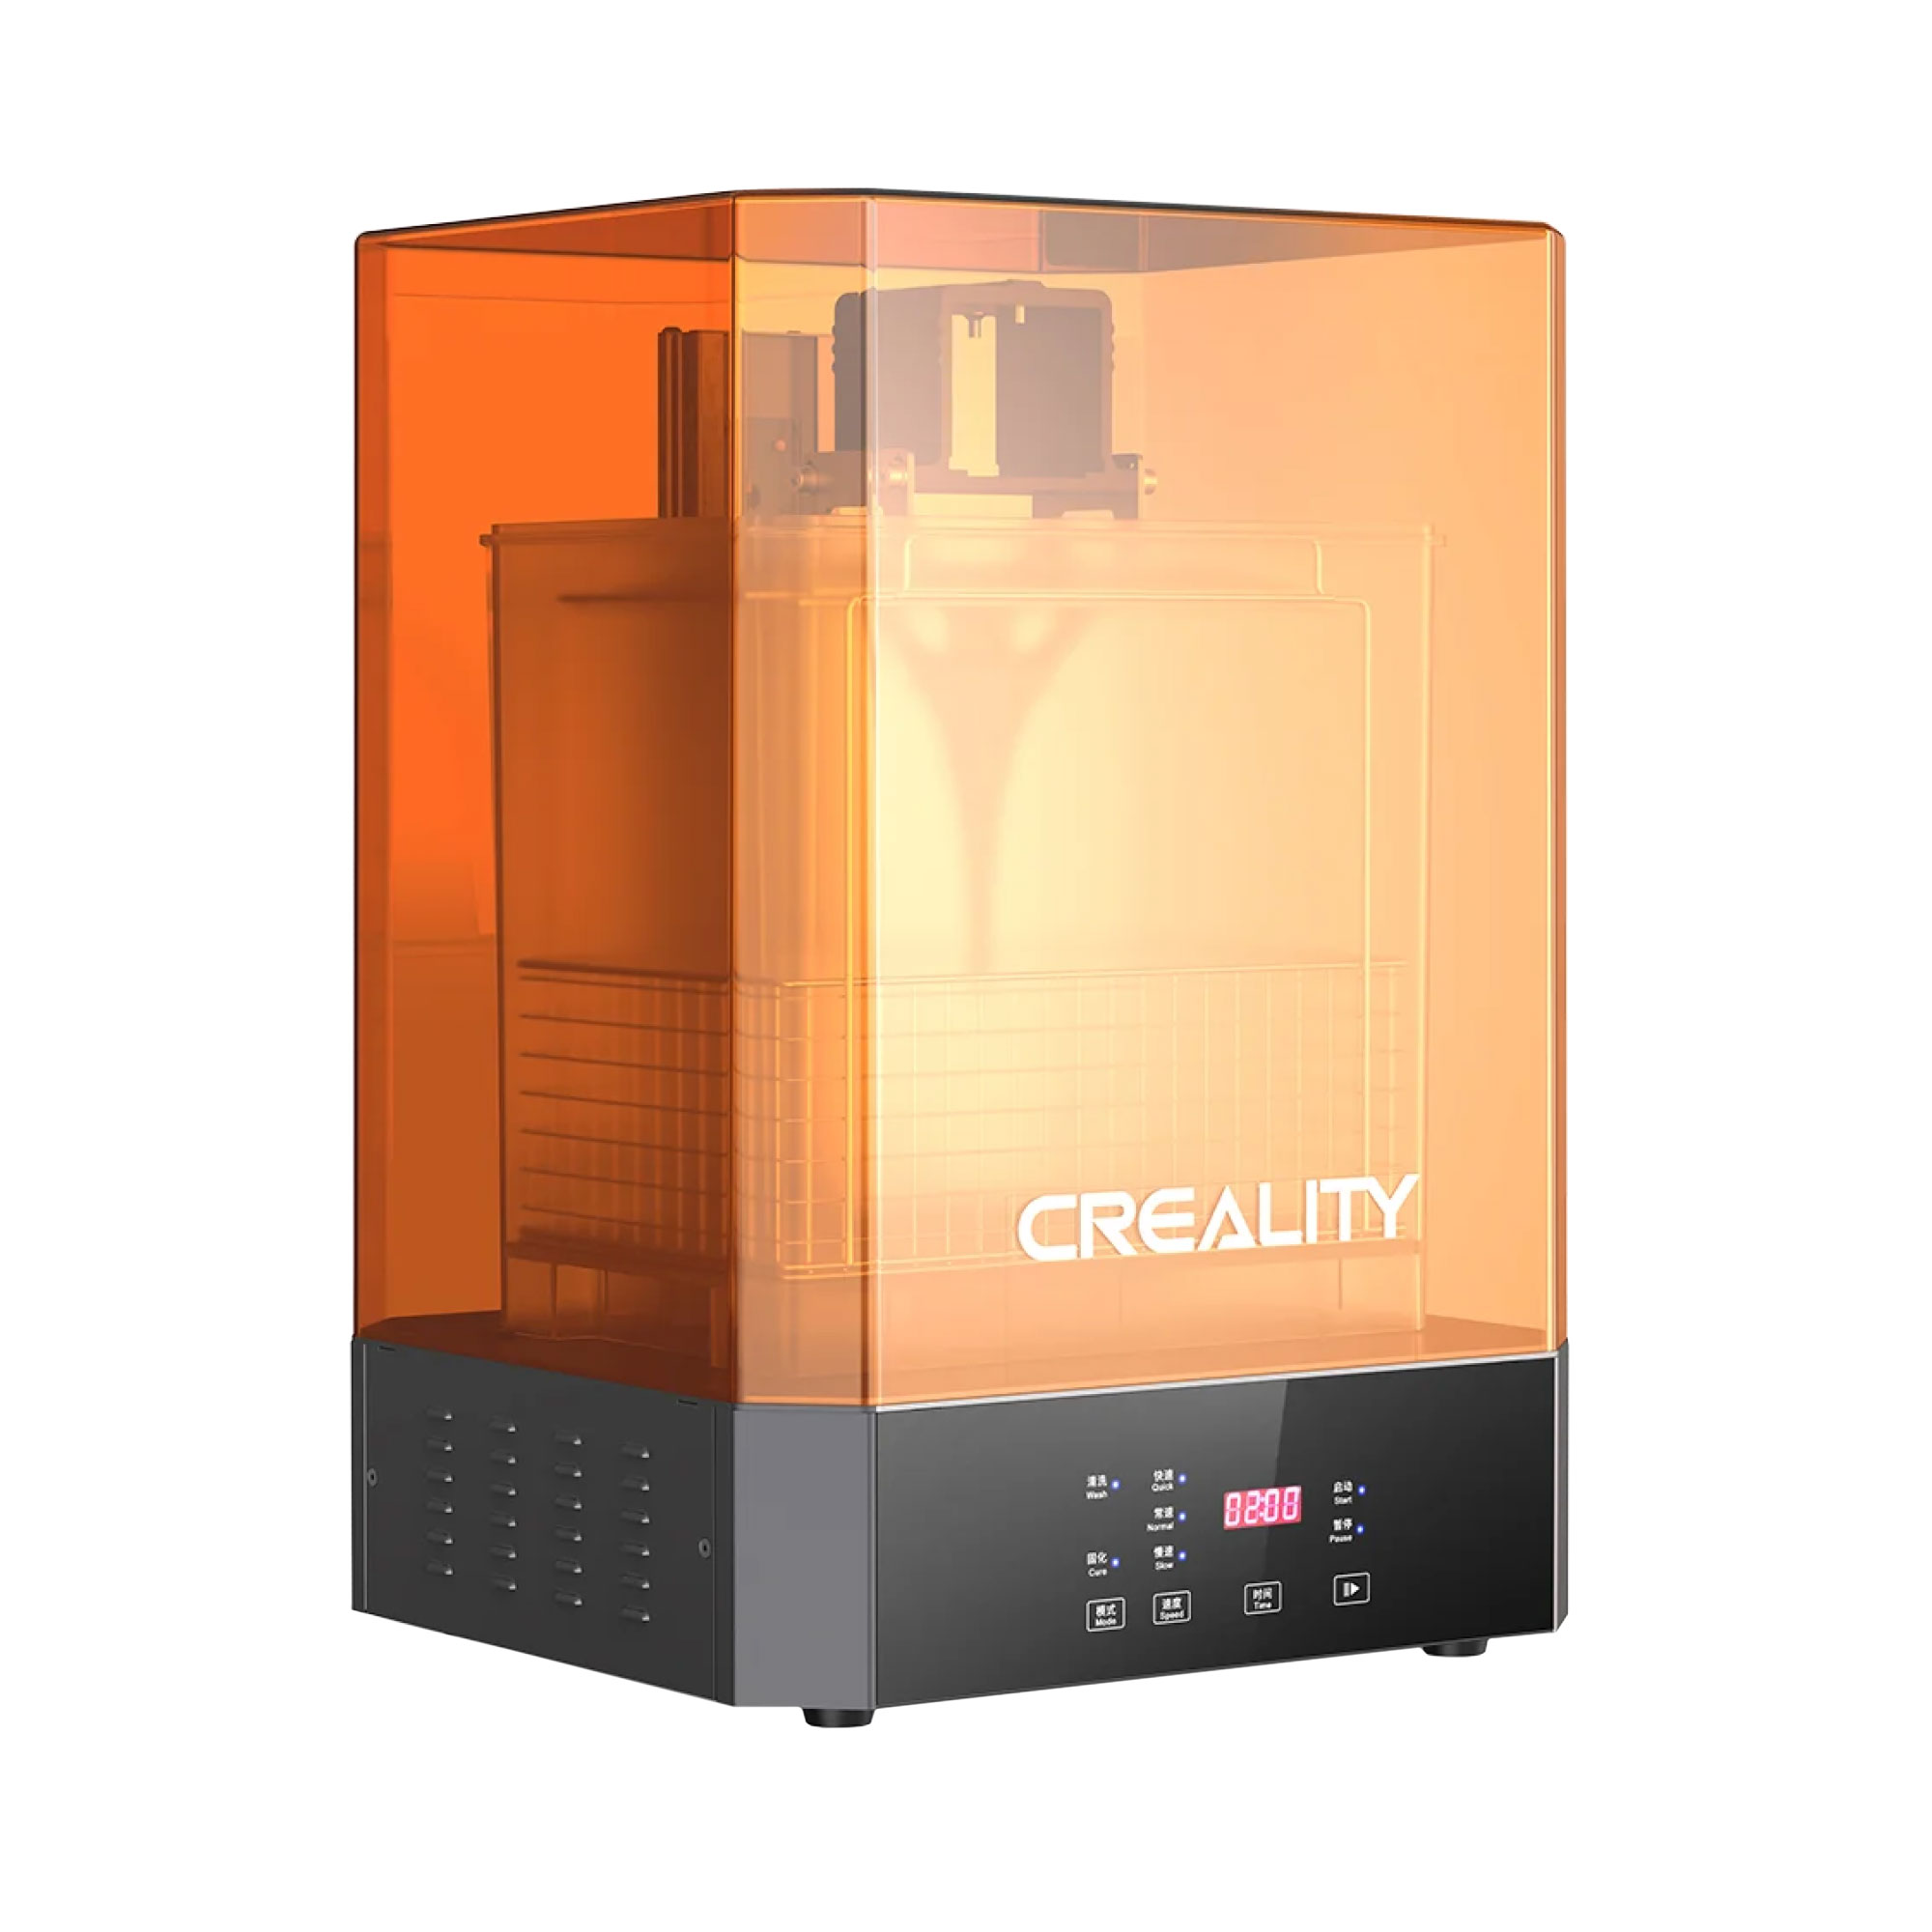 Creality UW-02 Review: Better Budget Option Than Anycubic's Wash and Cure?